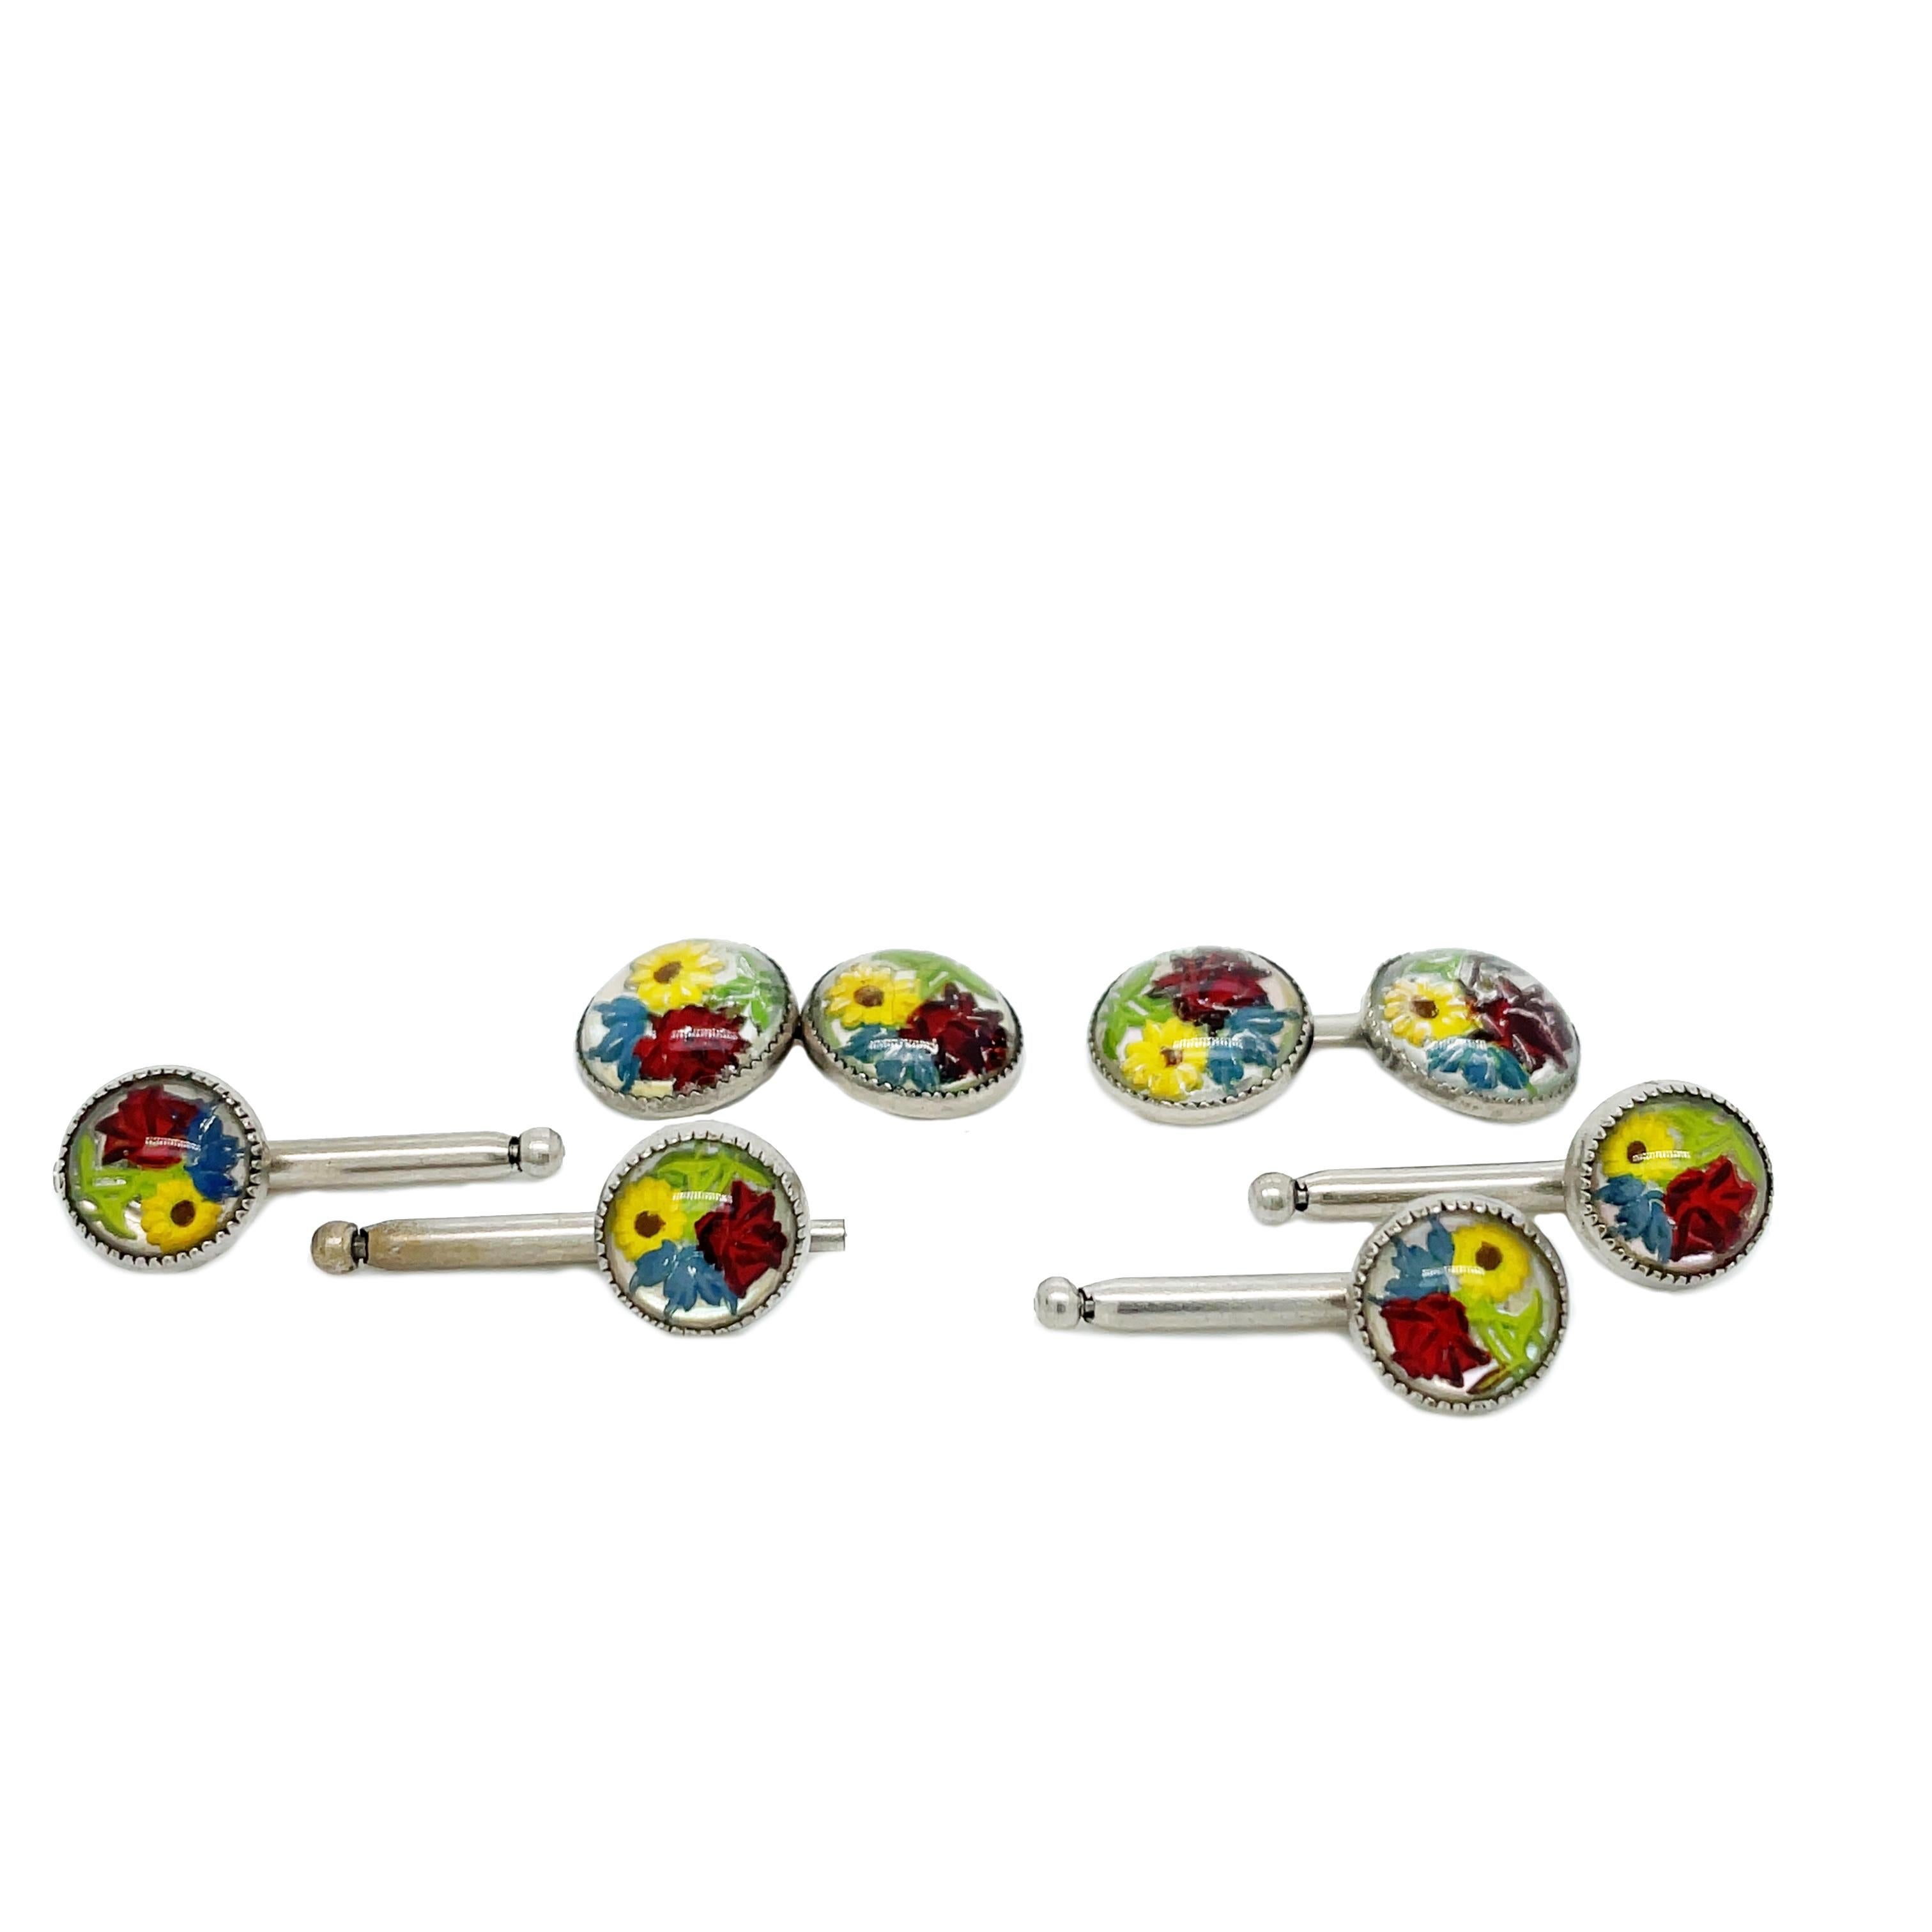 1910 Edwardian 8 Piece Pressed Glass Cufflink Stud Set In Excellent Condition For Sale In Lexington, KY